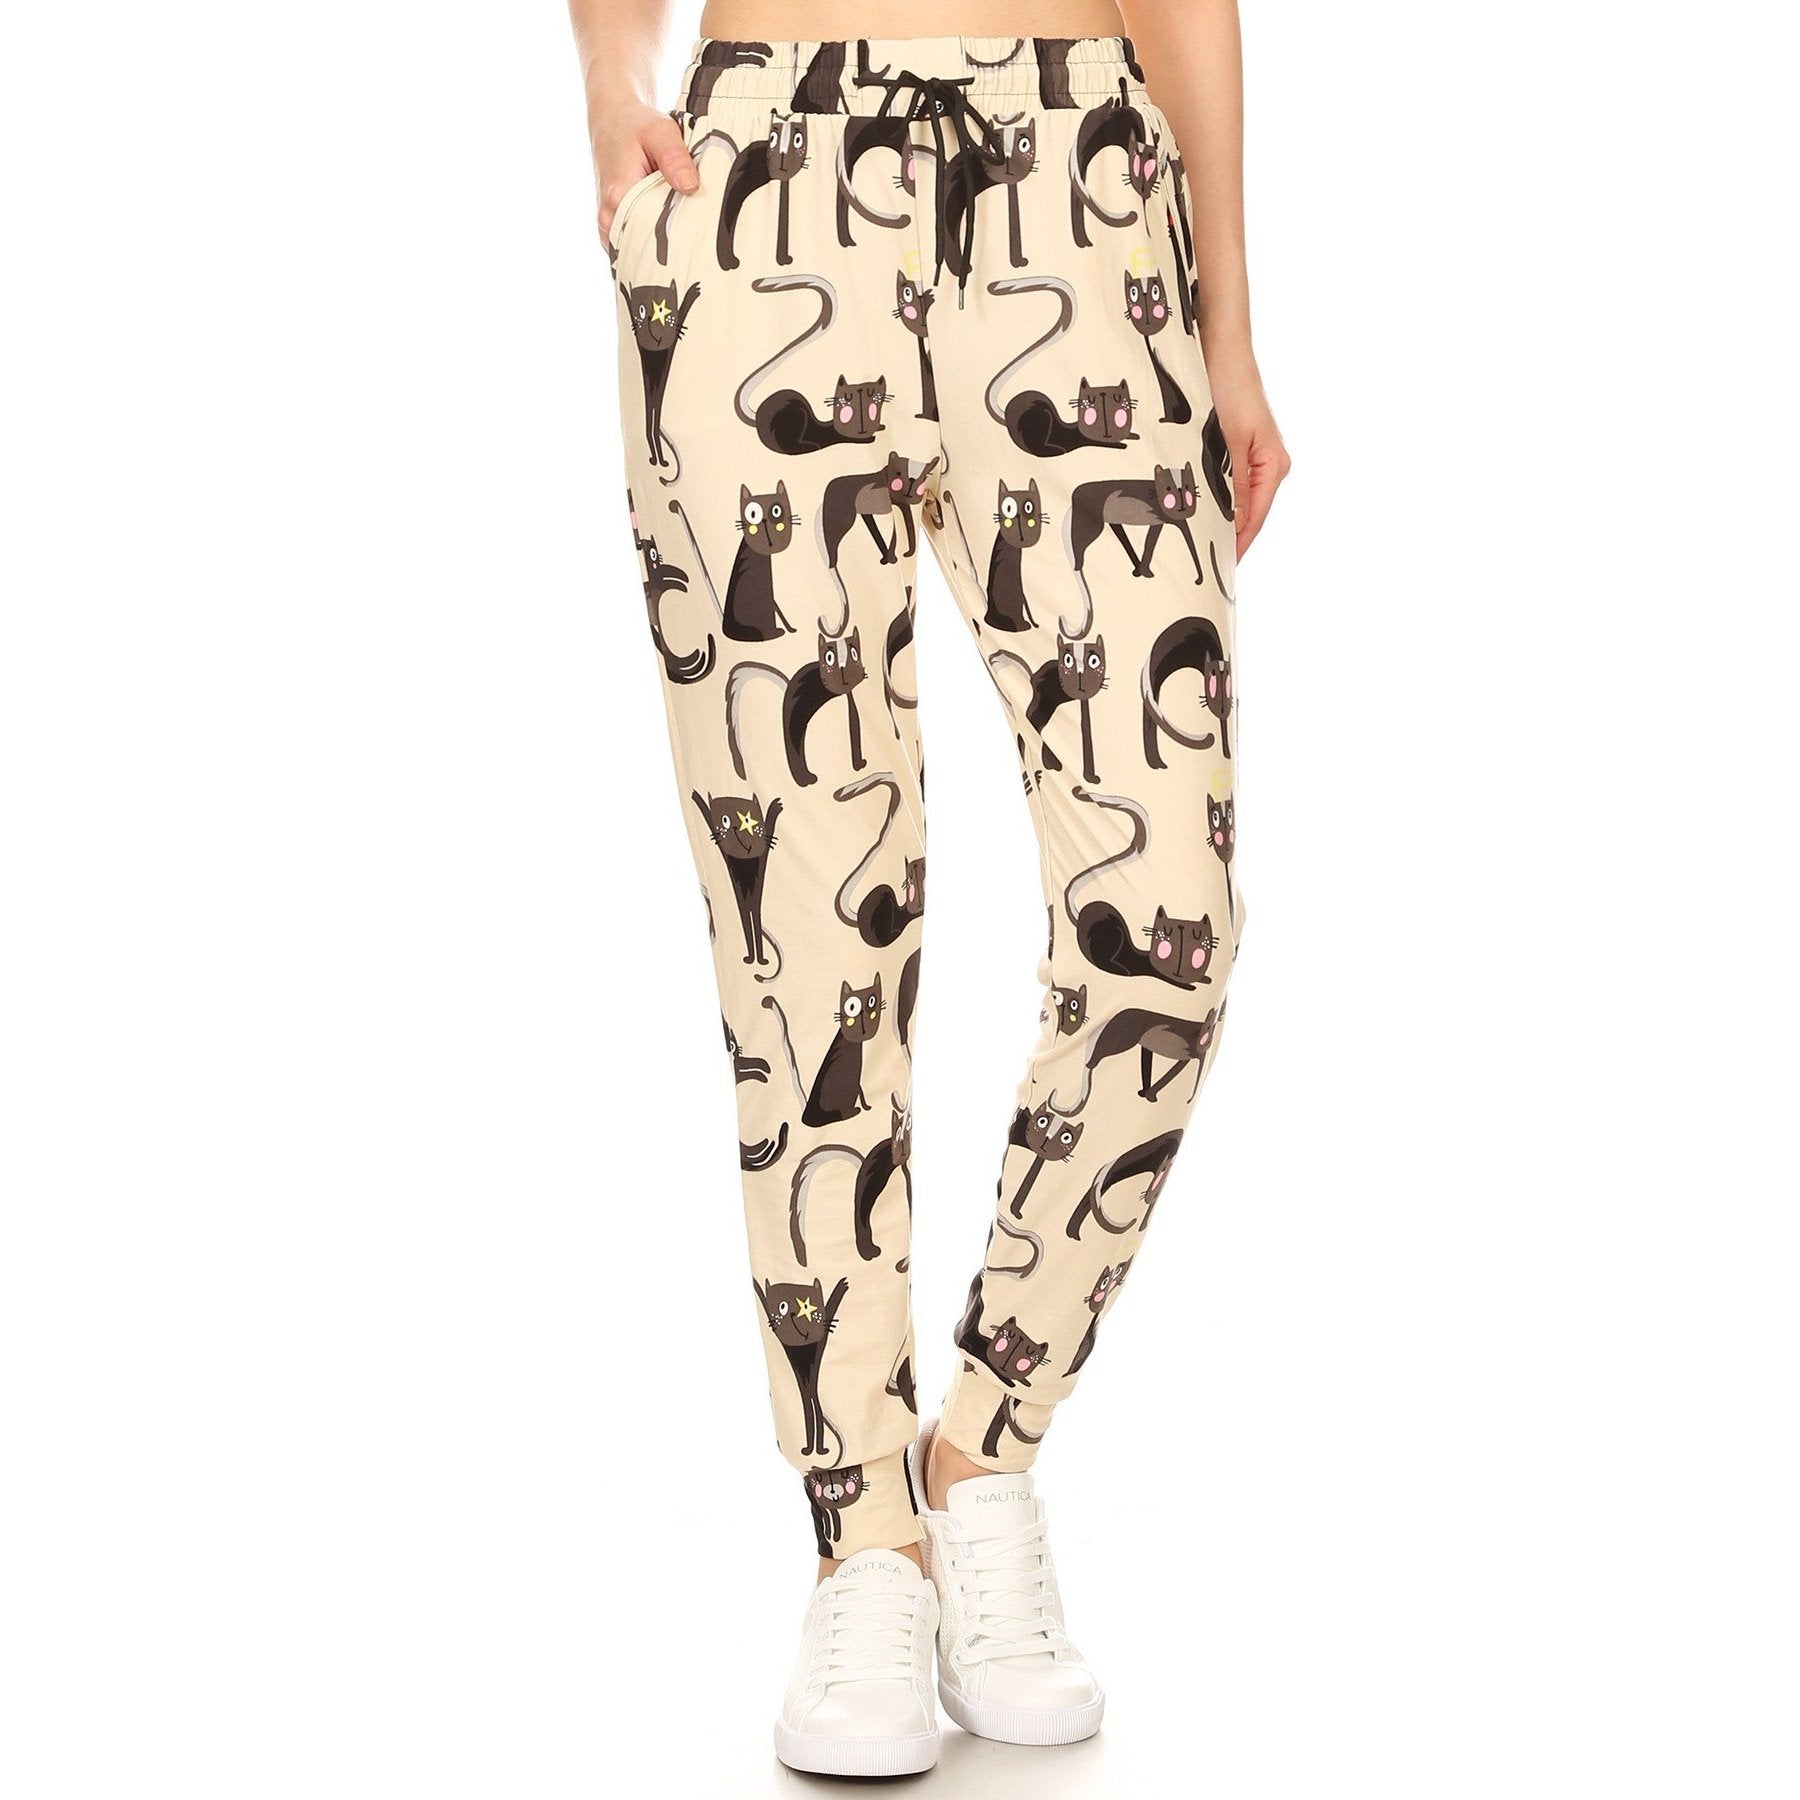 Cat Pajamas with Black Cats On Them for Women